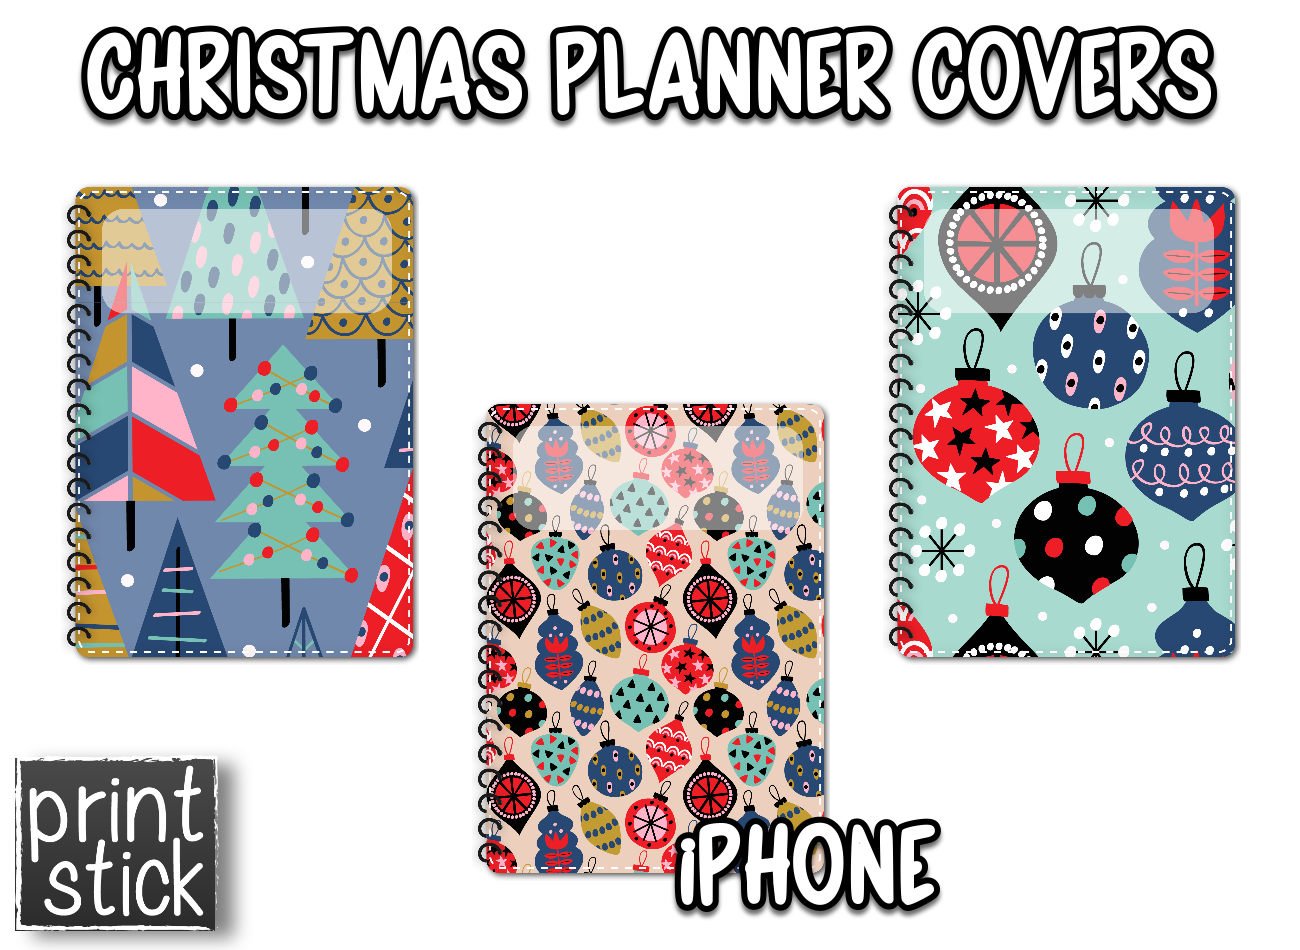 Covers for Planners - Christmas - Print Stick